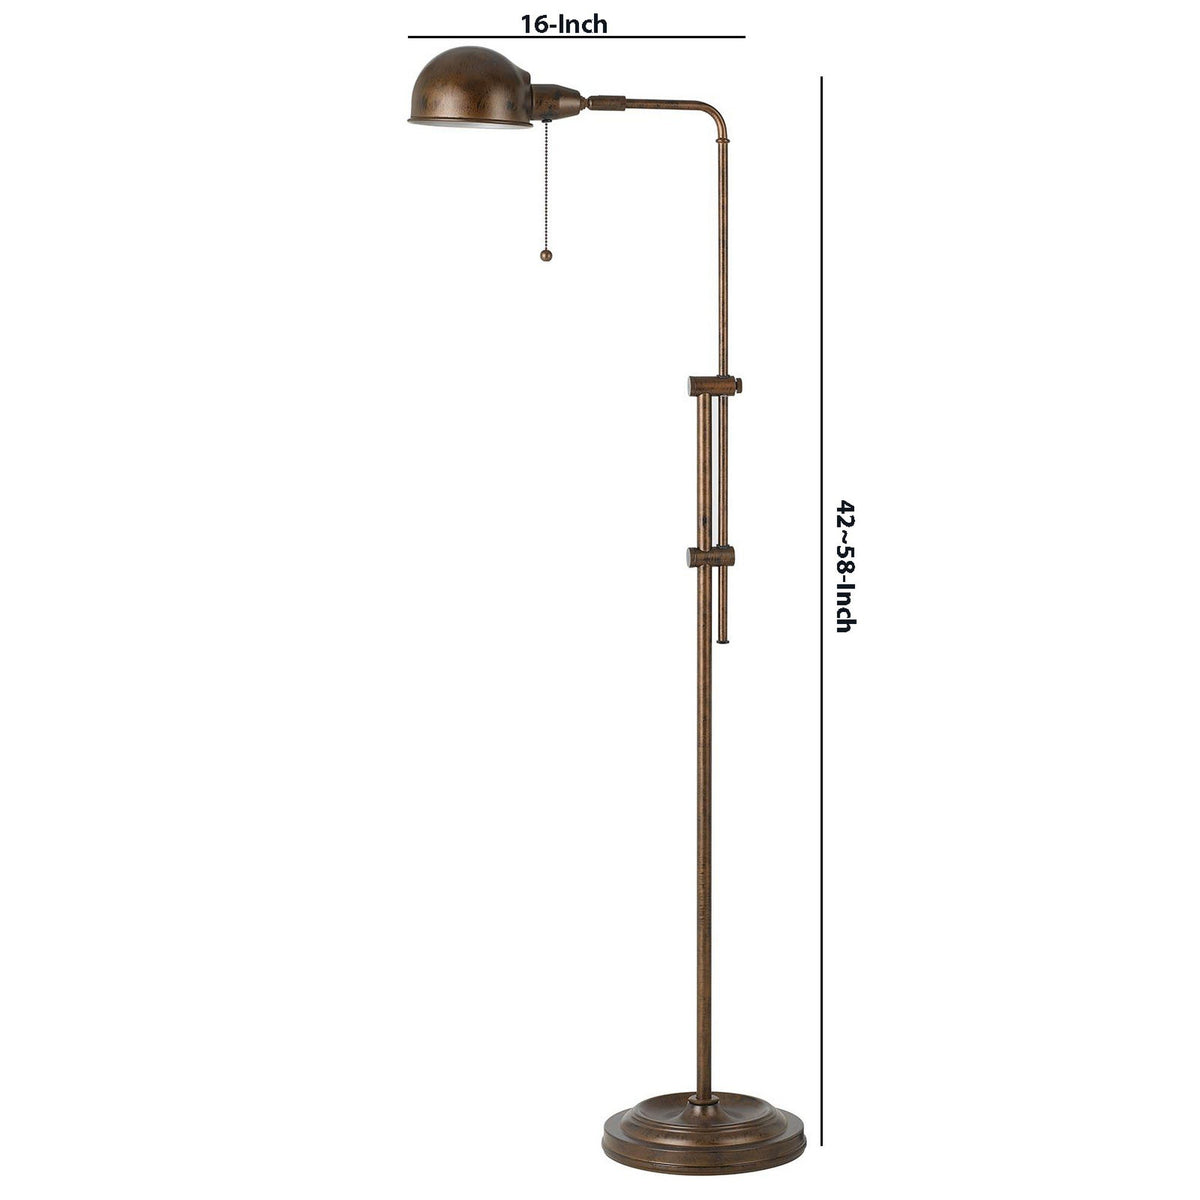 Adjustable Height Metal Pharmacy Lamp with Pull Chain Switch, Bronze - BM220839